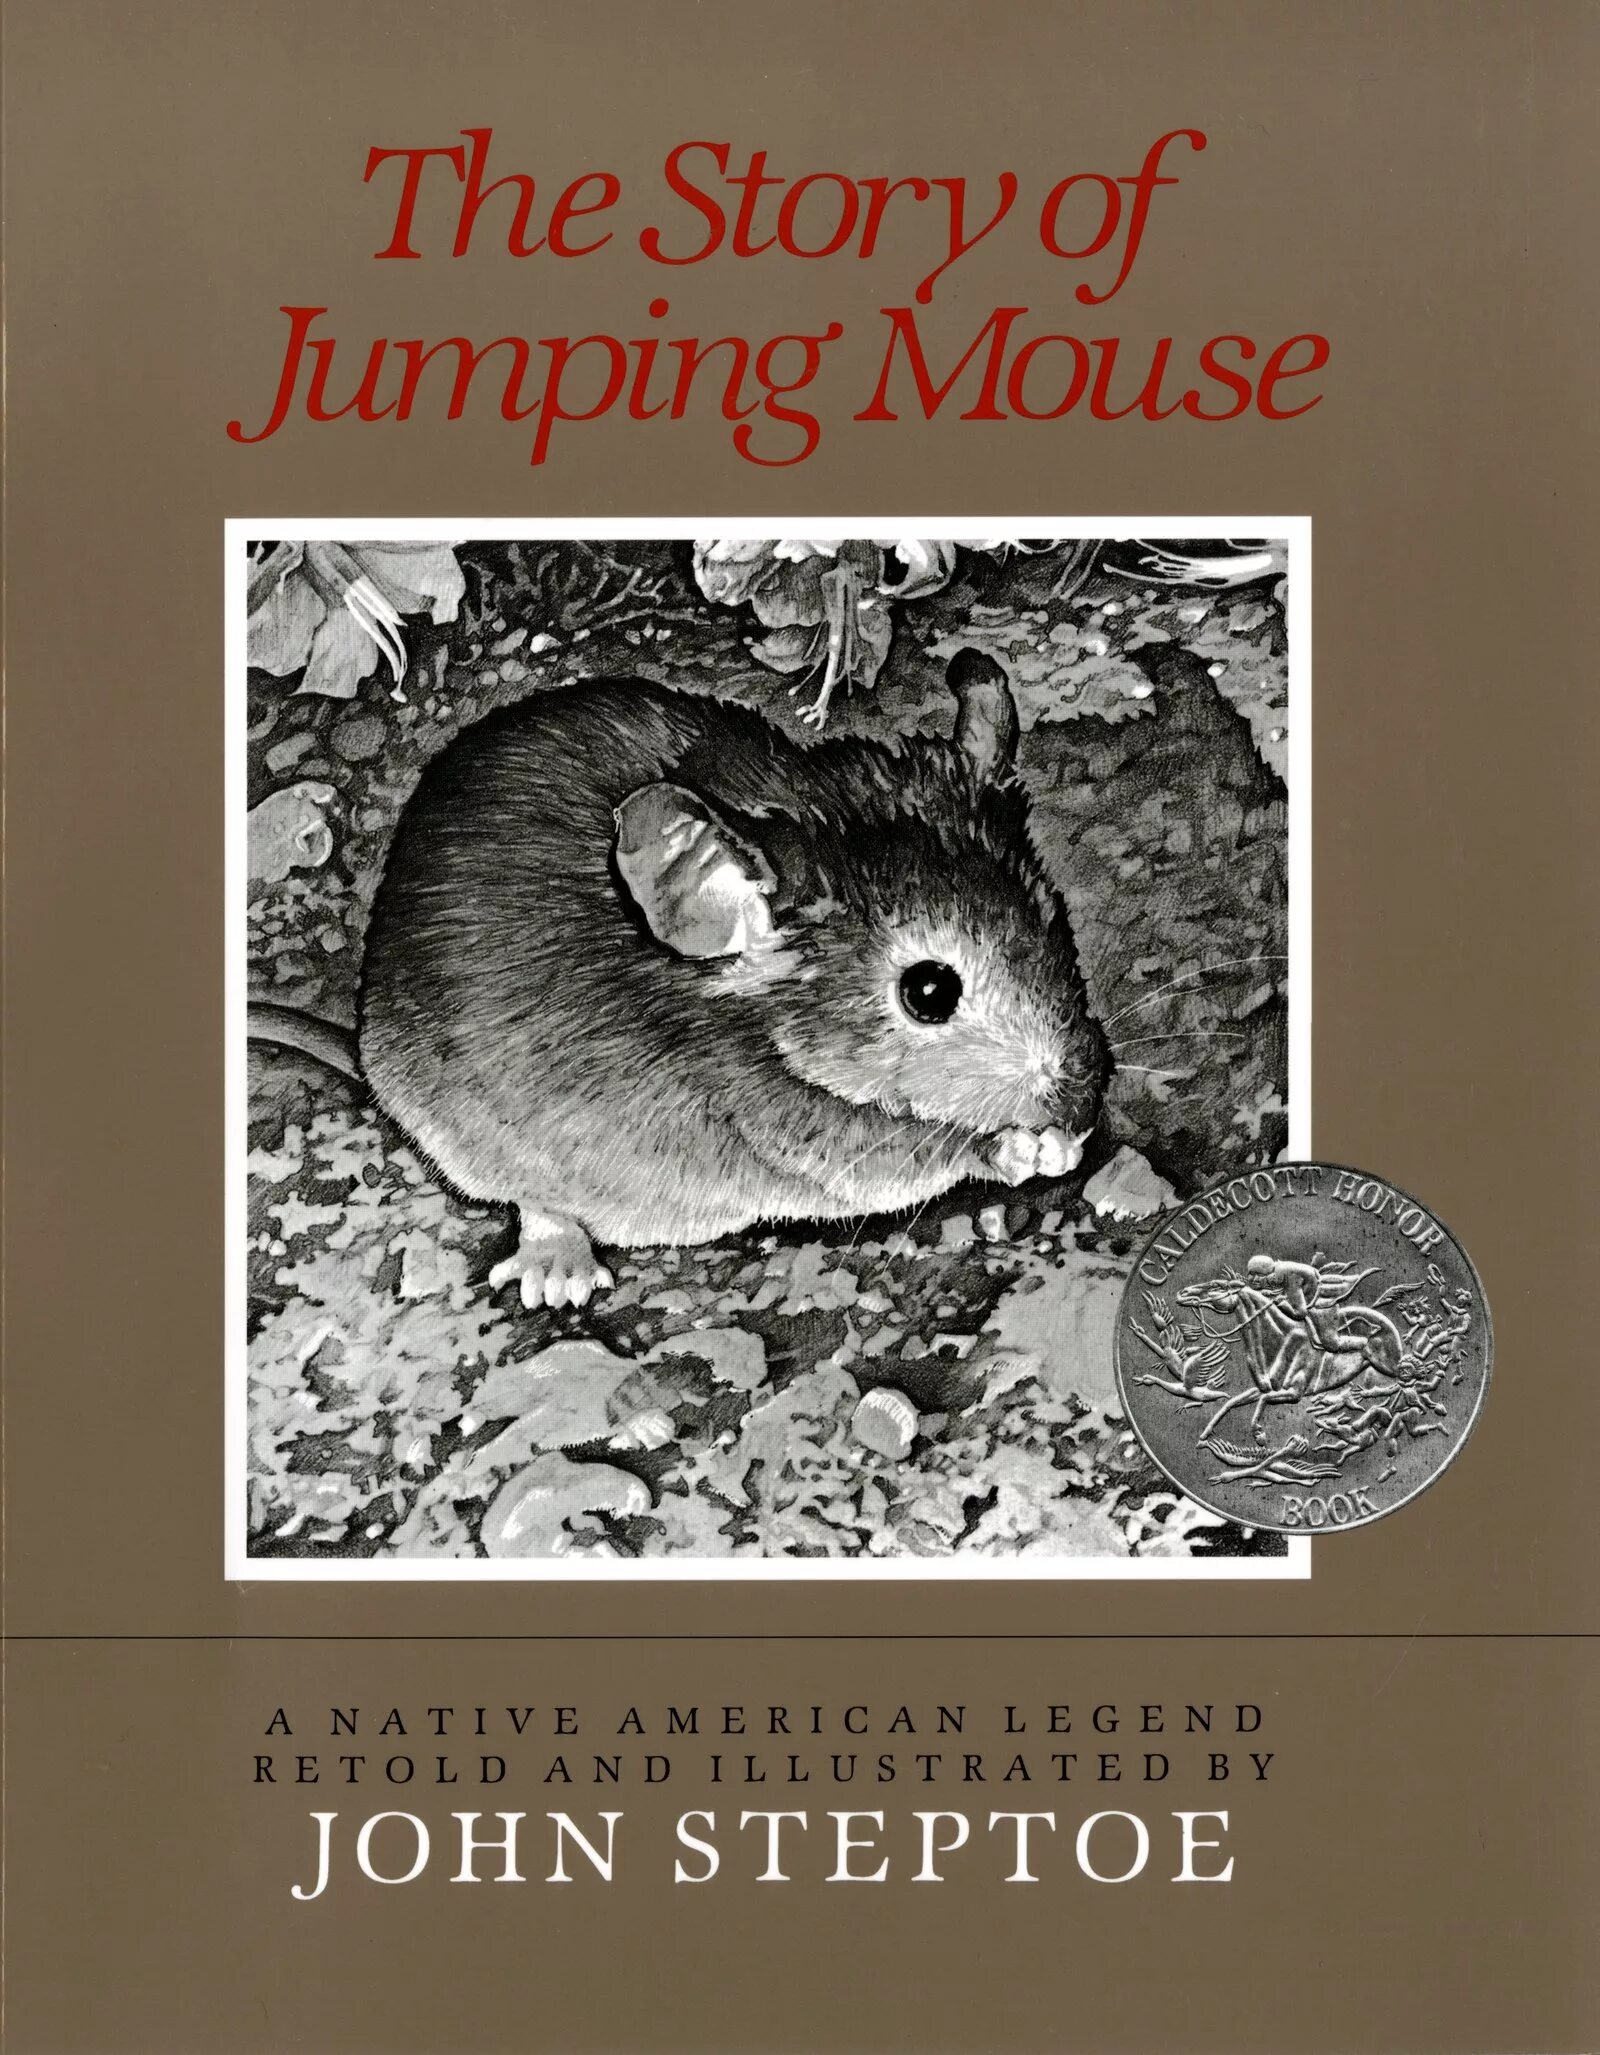 Mouse story. Джон Маус. Книга про Майсу. The story of Jonathan. Book about Mousy.